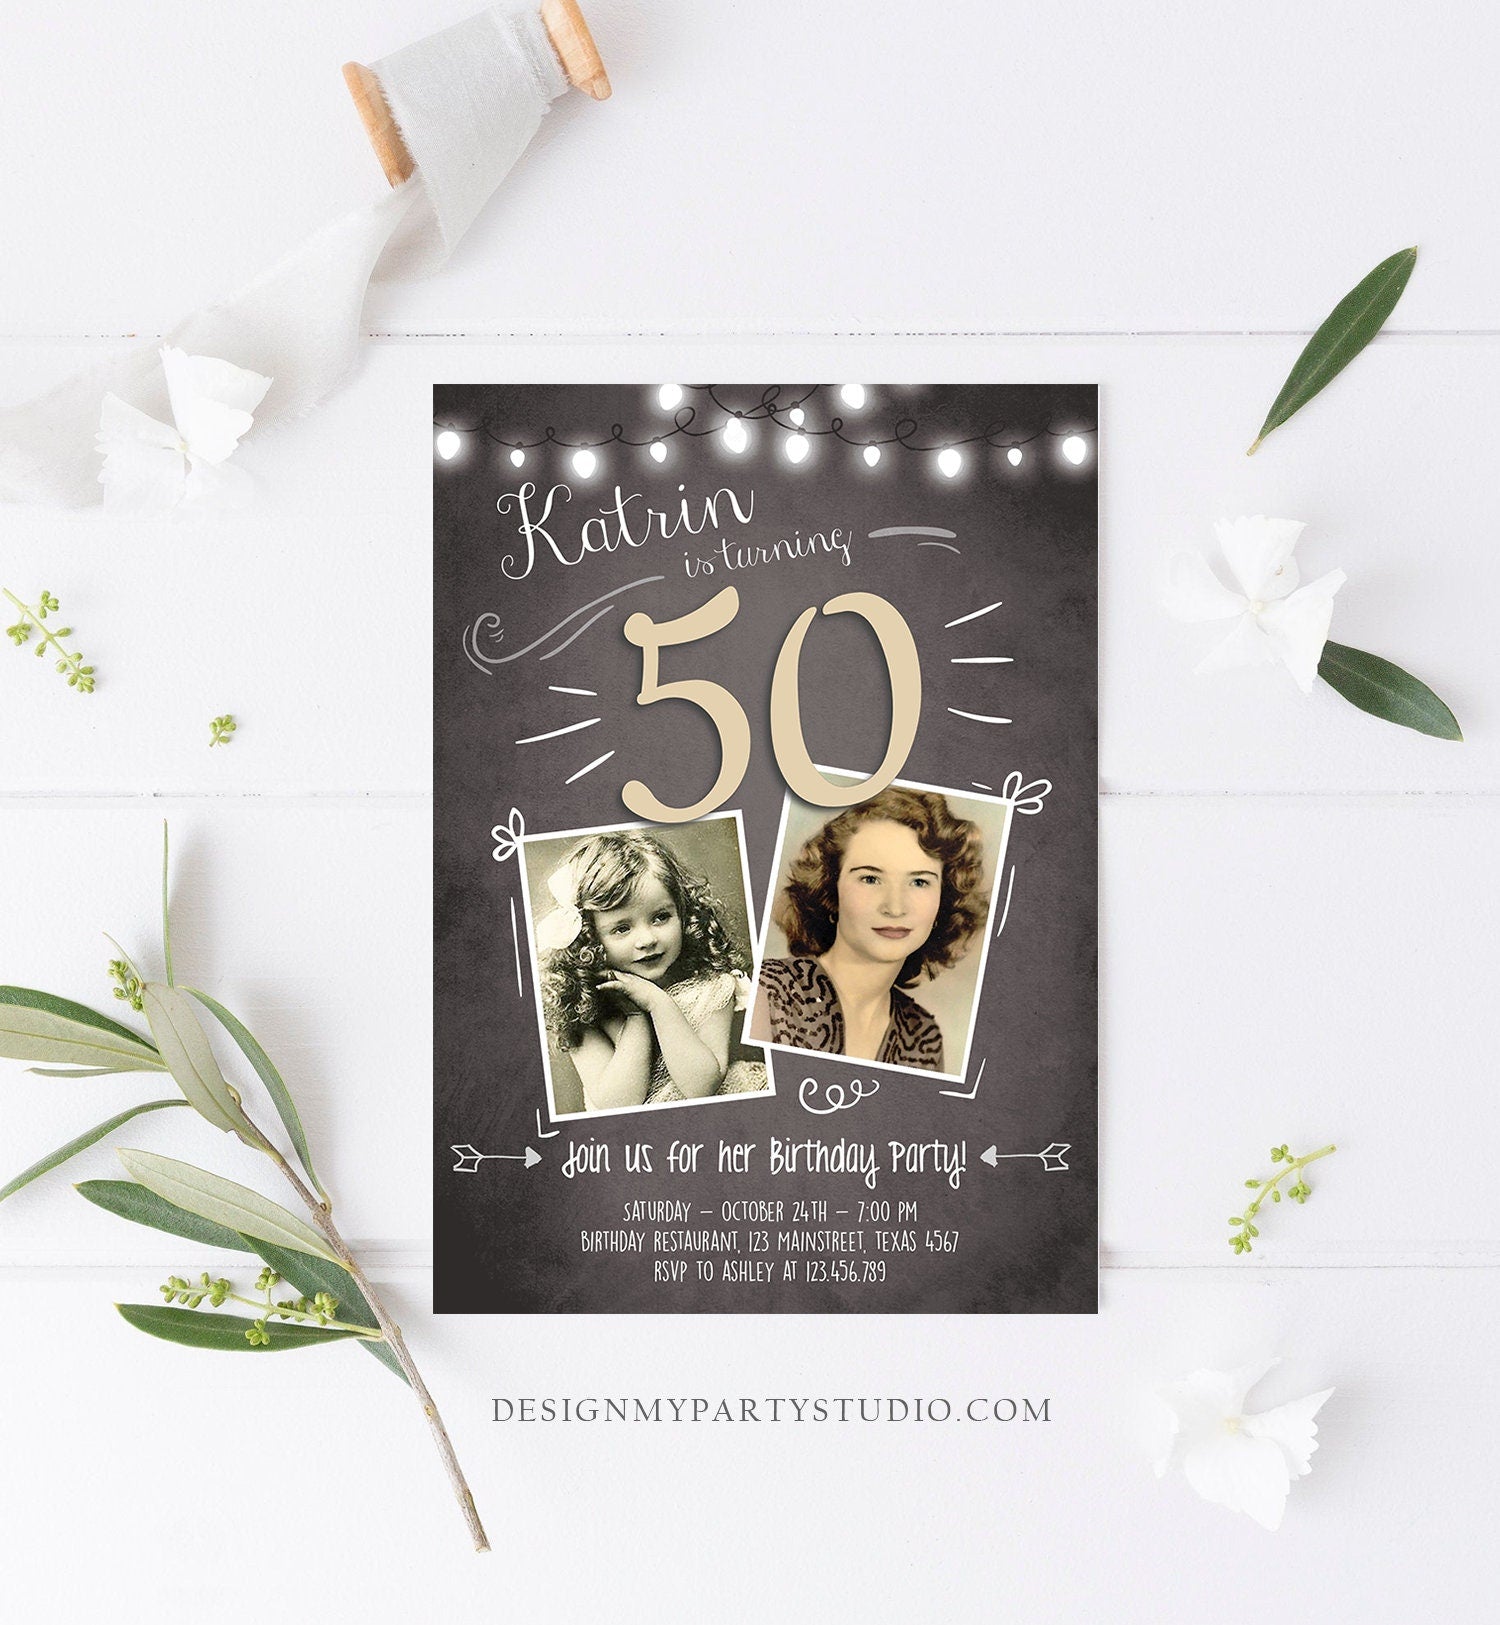 Editable 50th Birthday Invitation ANY AGE Chalkboard Rustic Adult Fifty Photo Vintage Golden Jubilee Anniversary Corjl Template 0230